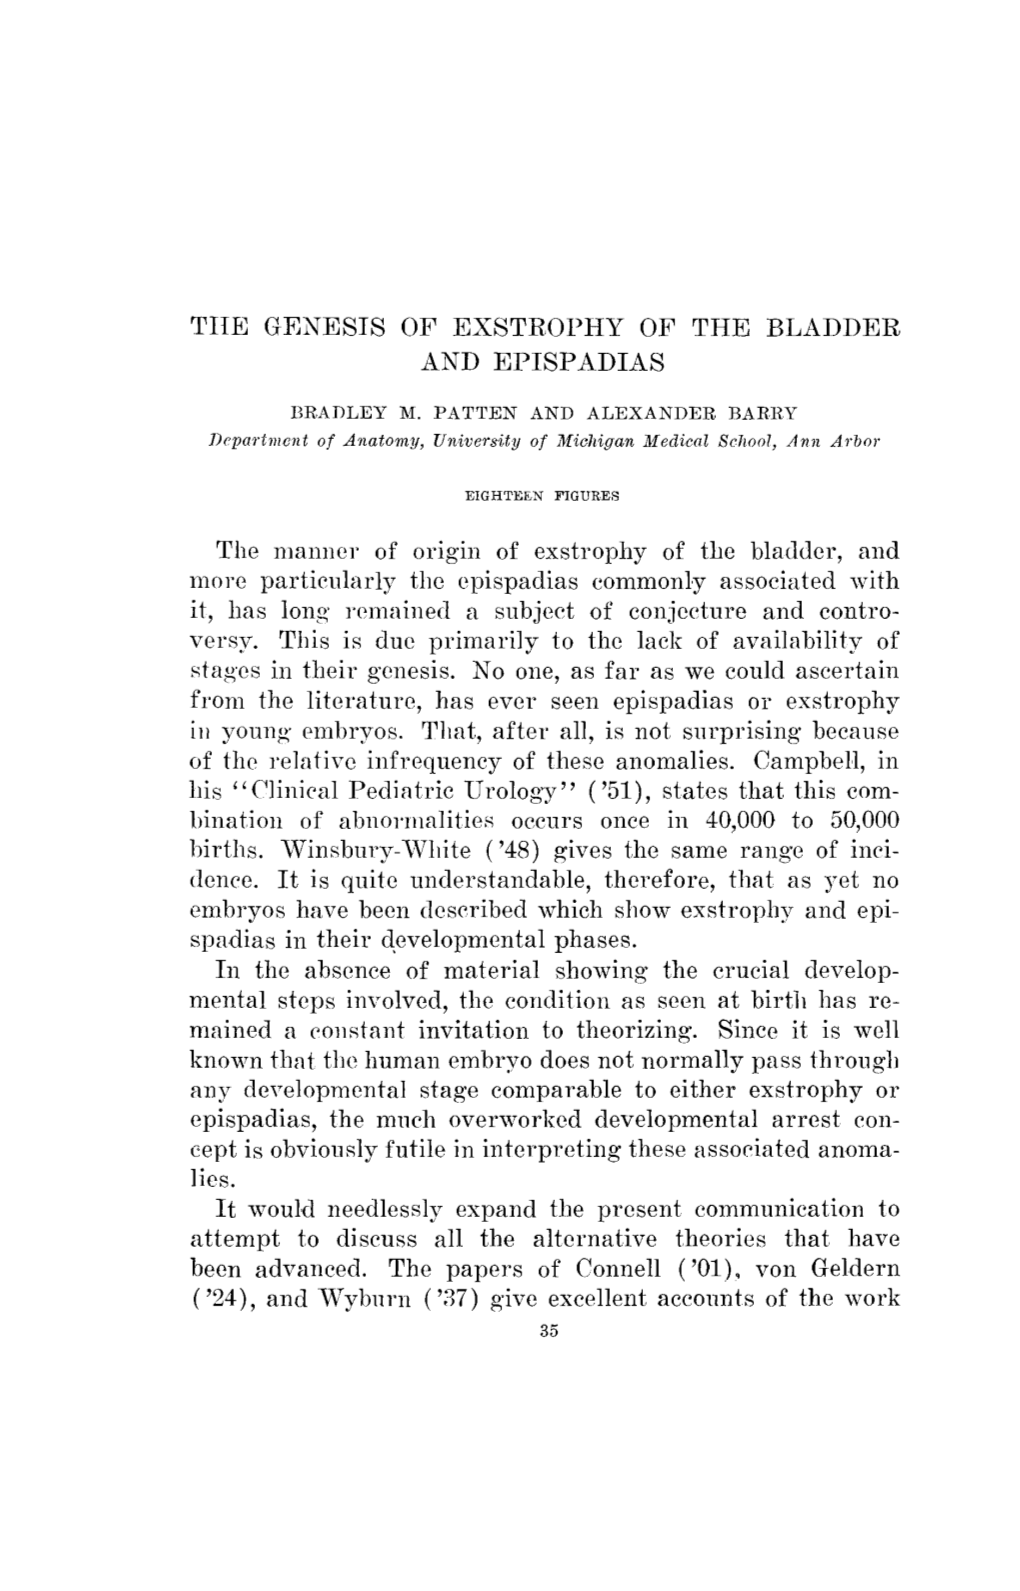 The: Genesis of Exstrophy of the Bladder and Epispadias